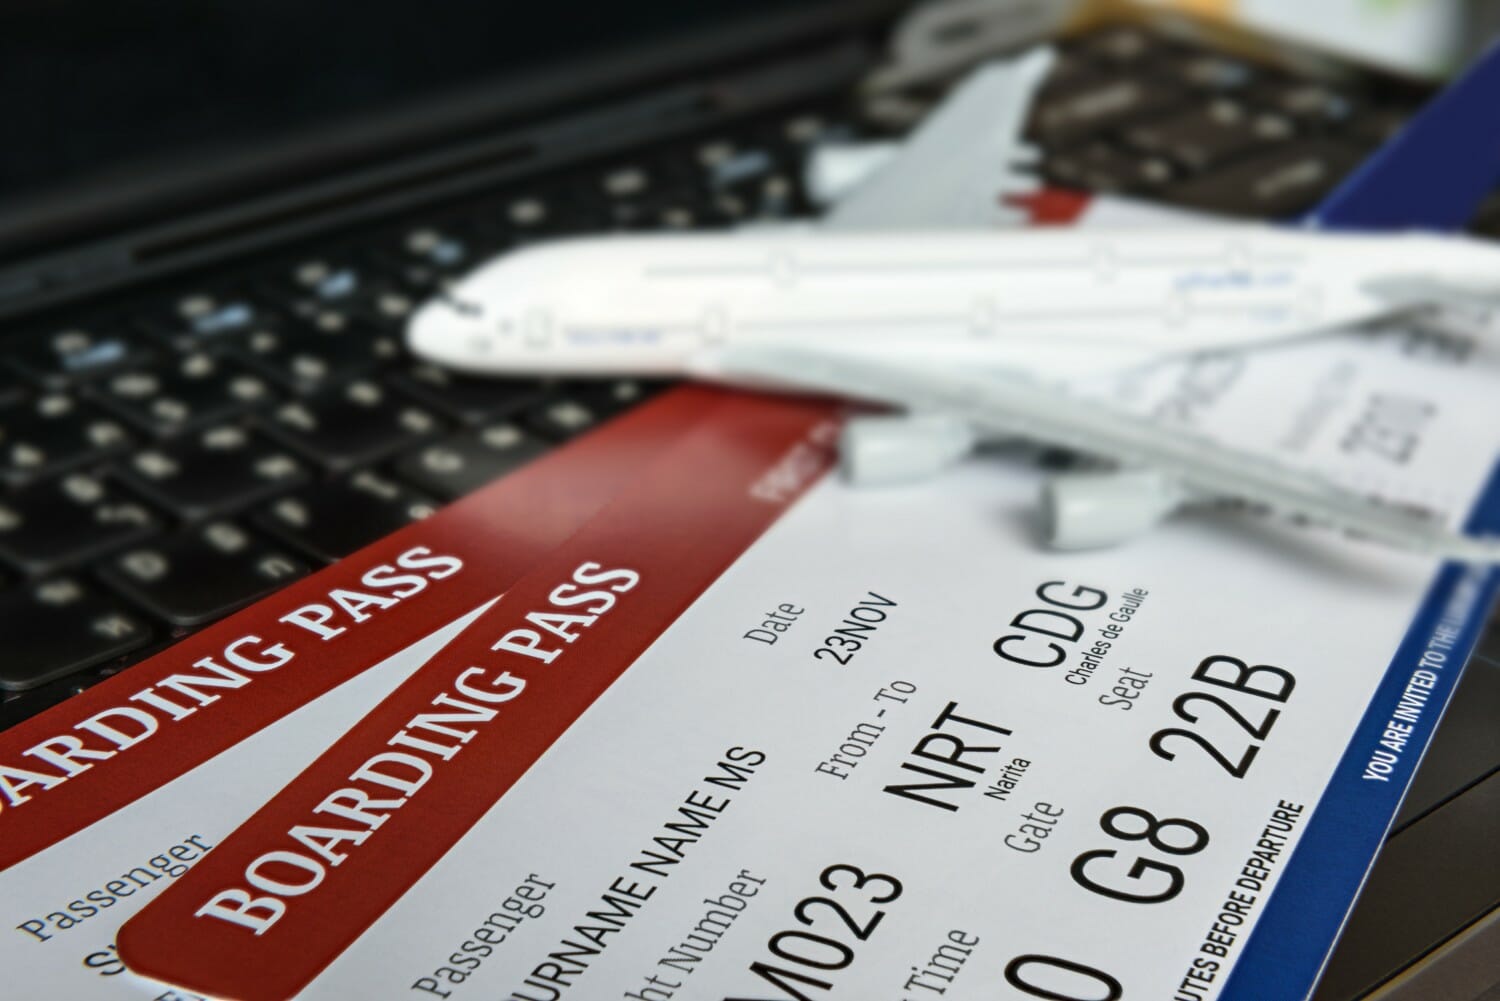 Cheap Flight Ticket Booking: 10 Tips to Book Your Next Flight